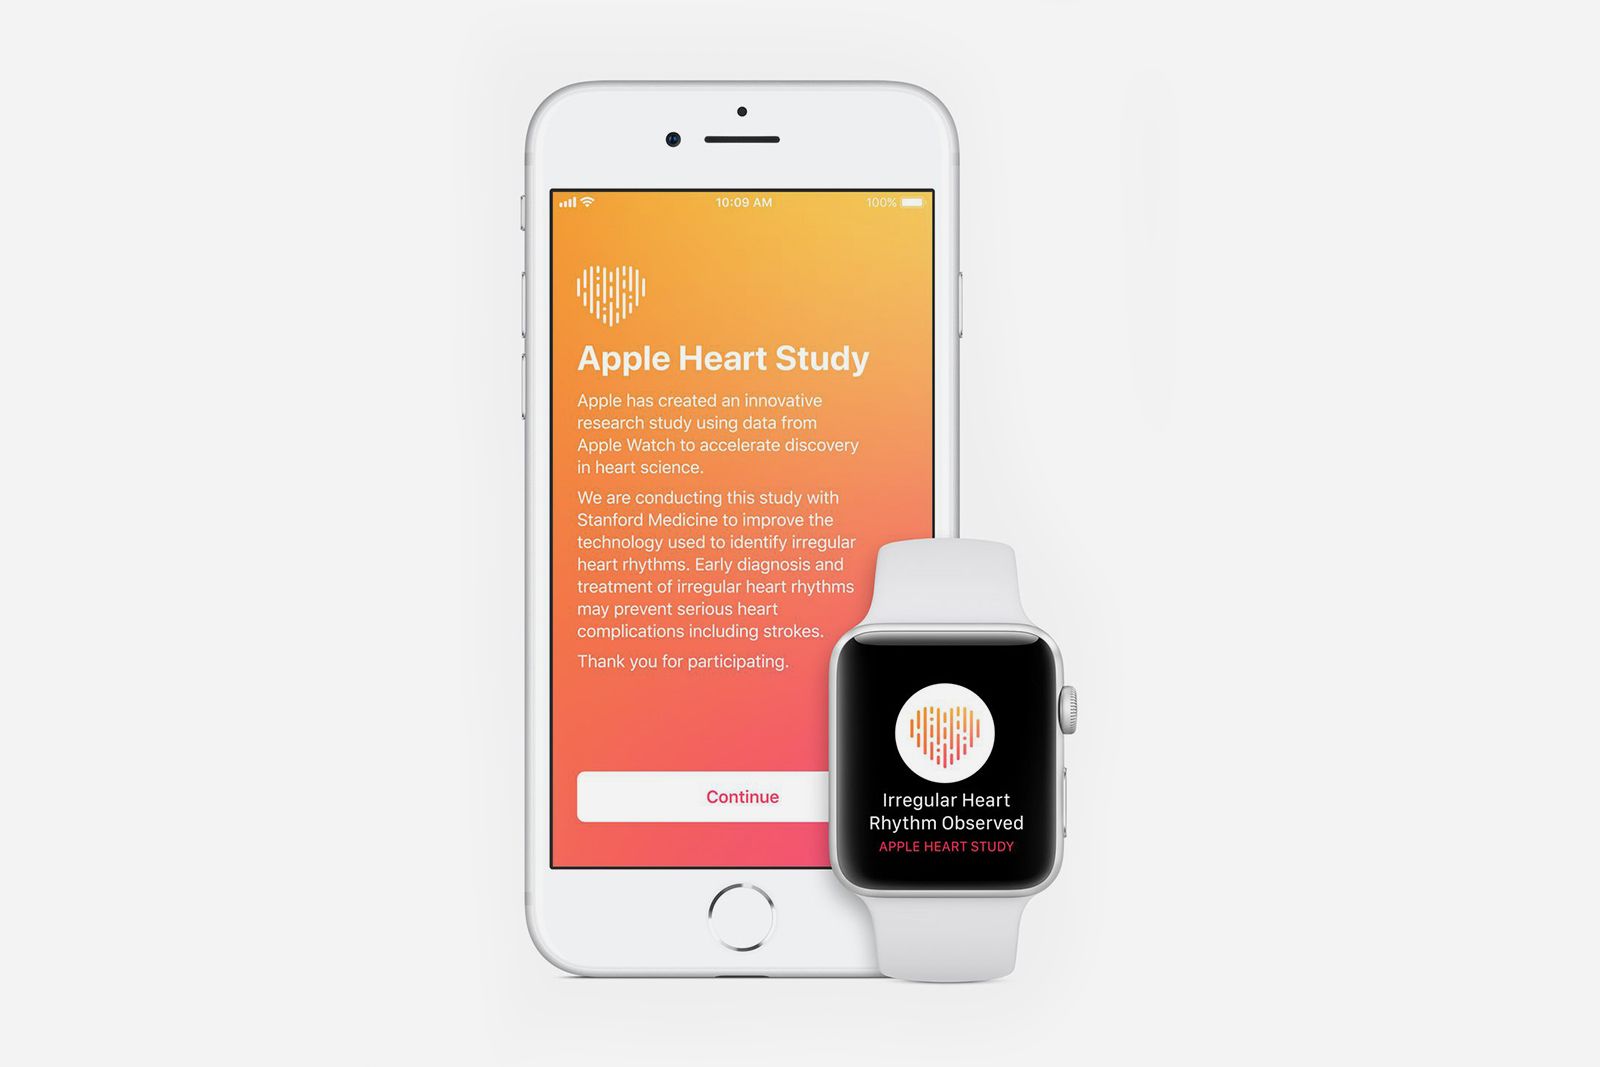 Apple Heart Study app launches as FDA clears first Apple Watch EKG reader image 1